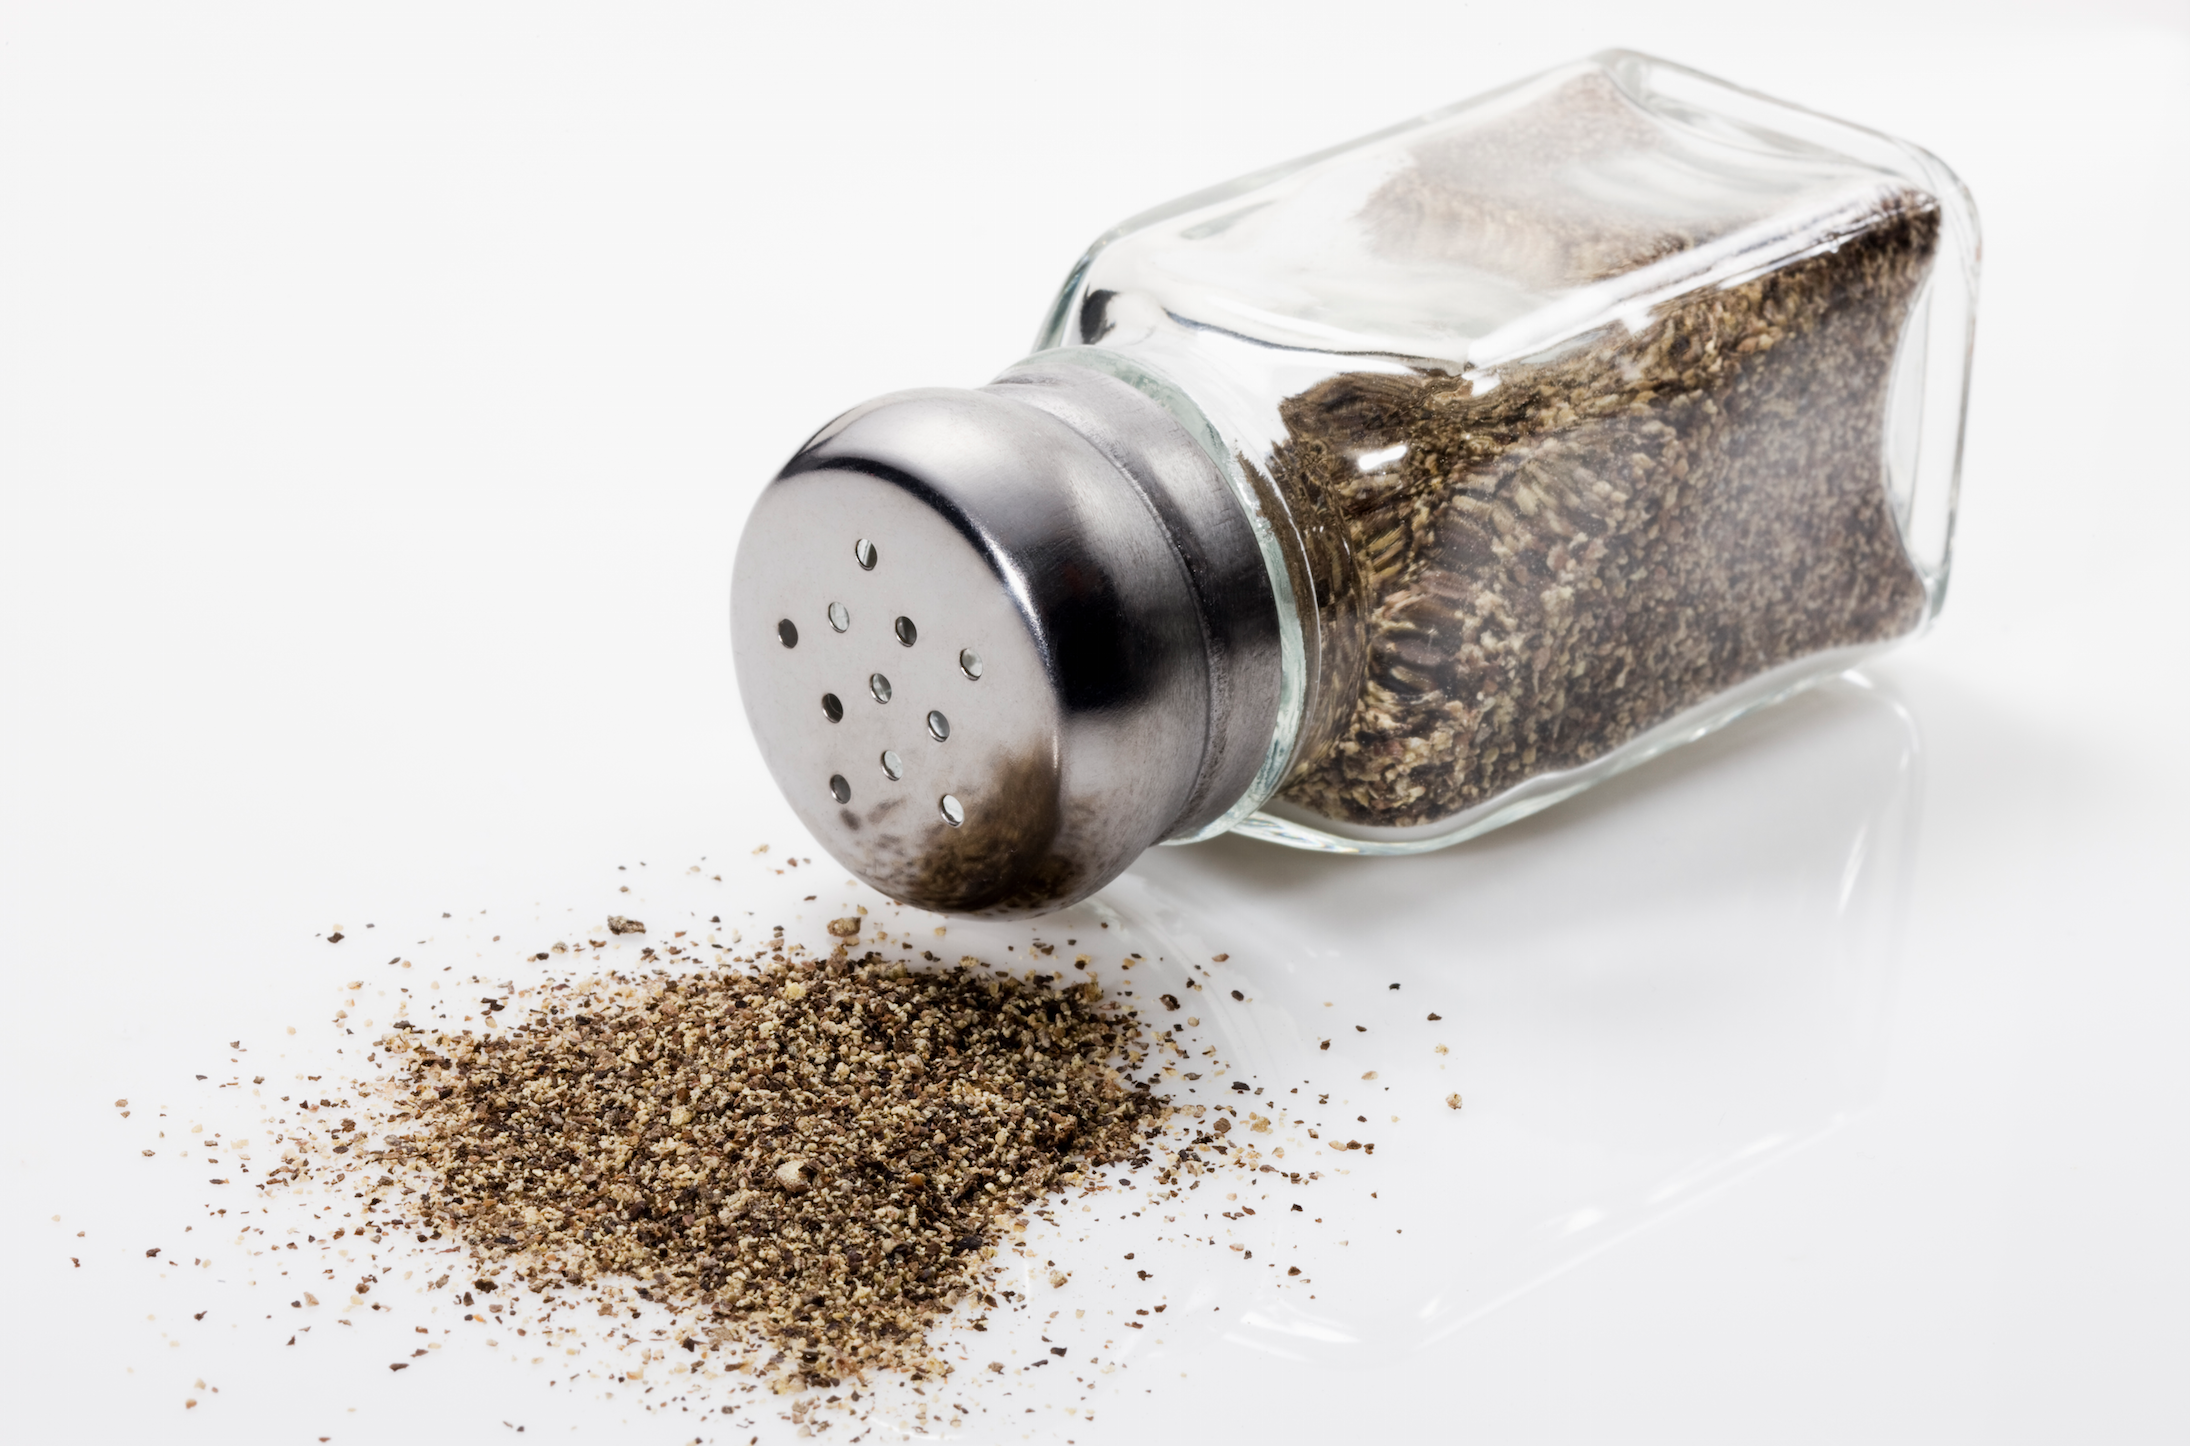 Pepper Shakers Are Super Germy - Pepper Shakers Second Dirtiest Item In  Restaurant